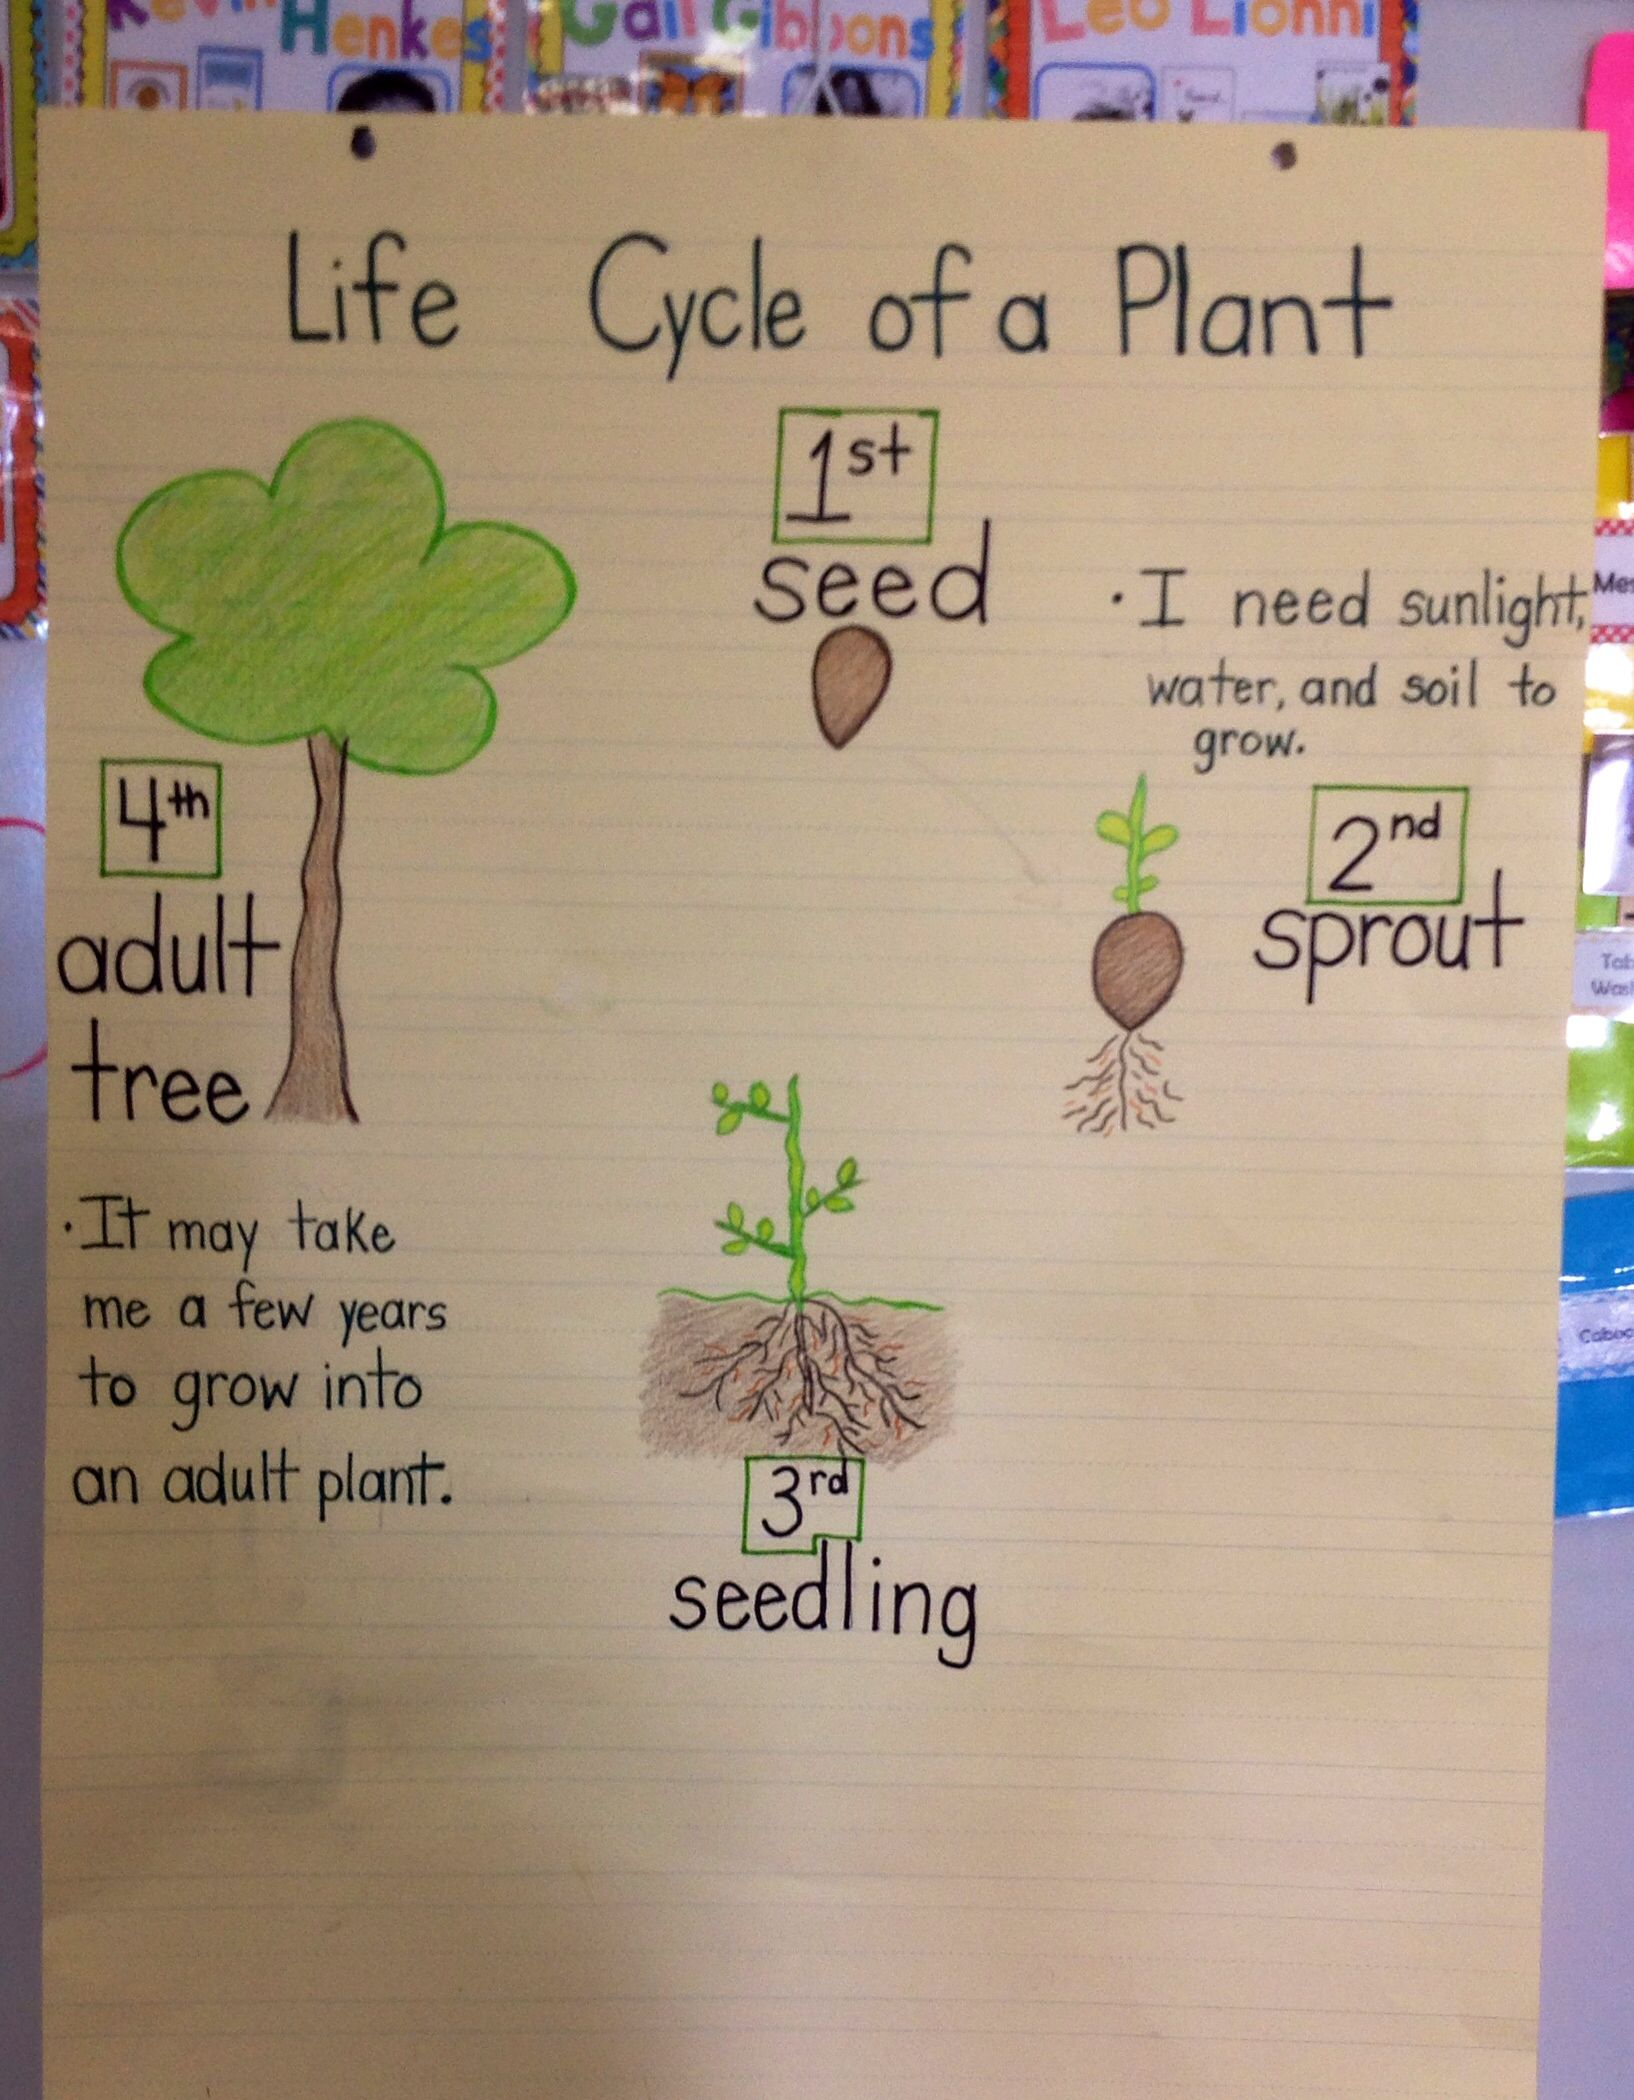 Research Focus - Life Cycle Of A Plant (With Images) | Plant